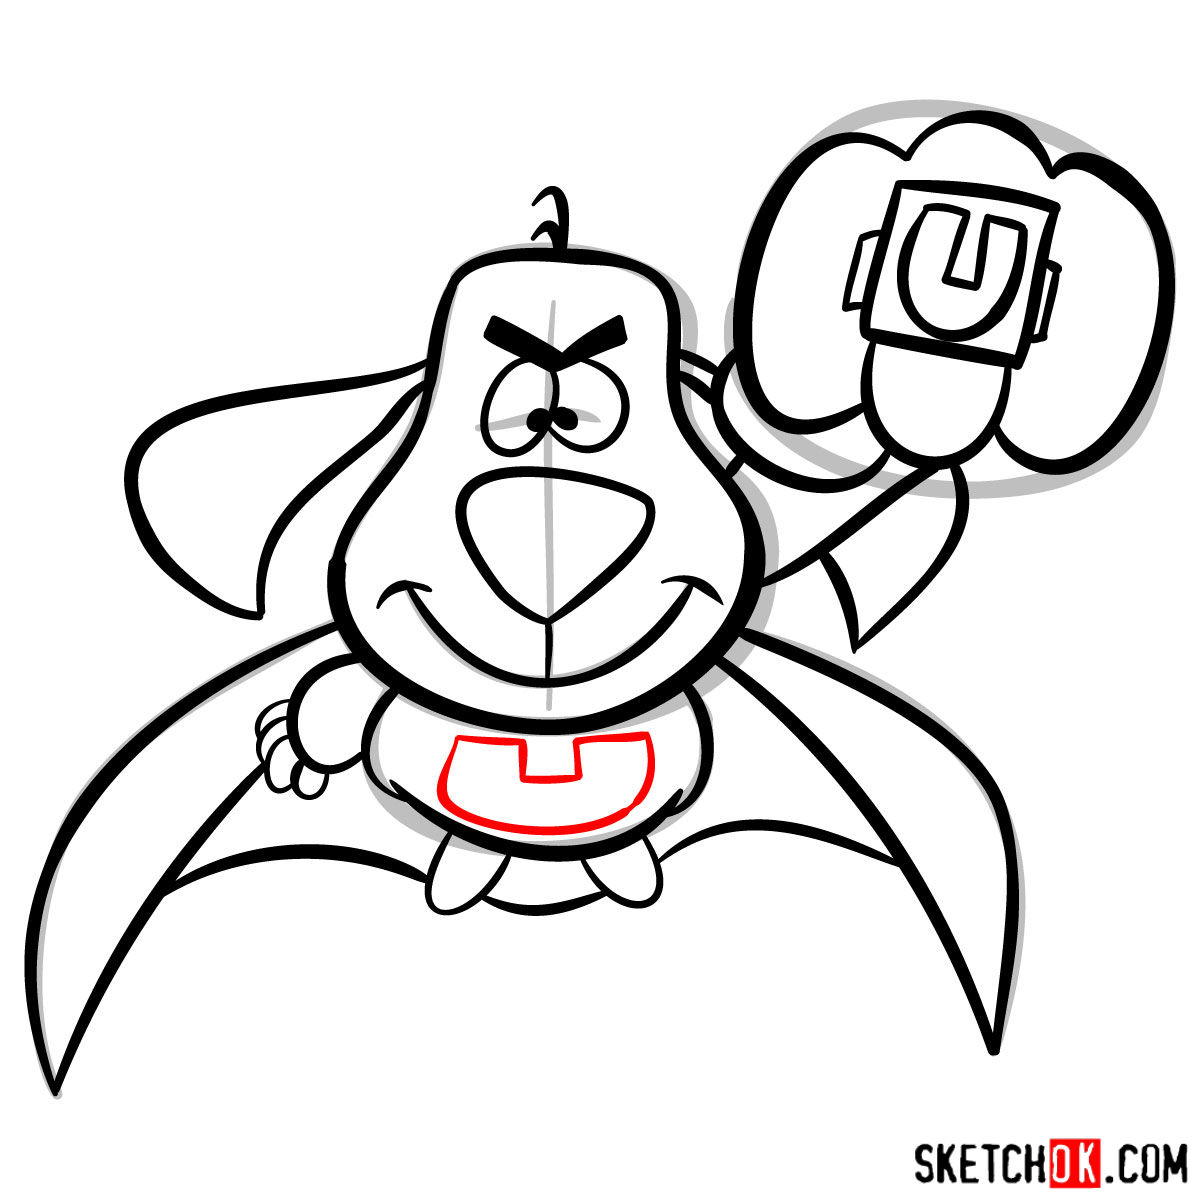 How to draw Underdog - step 10